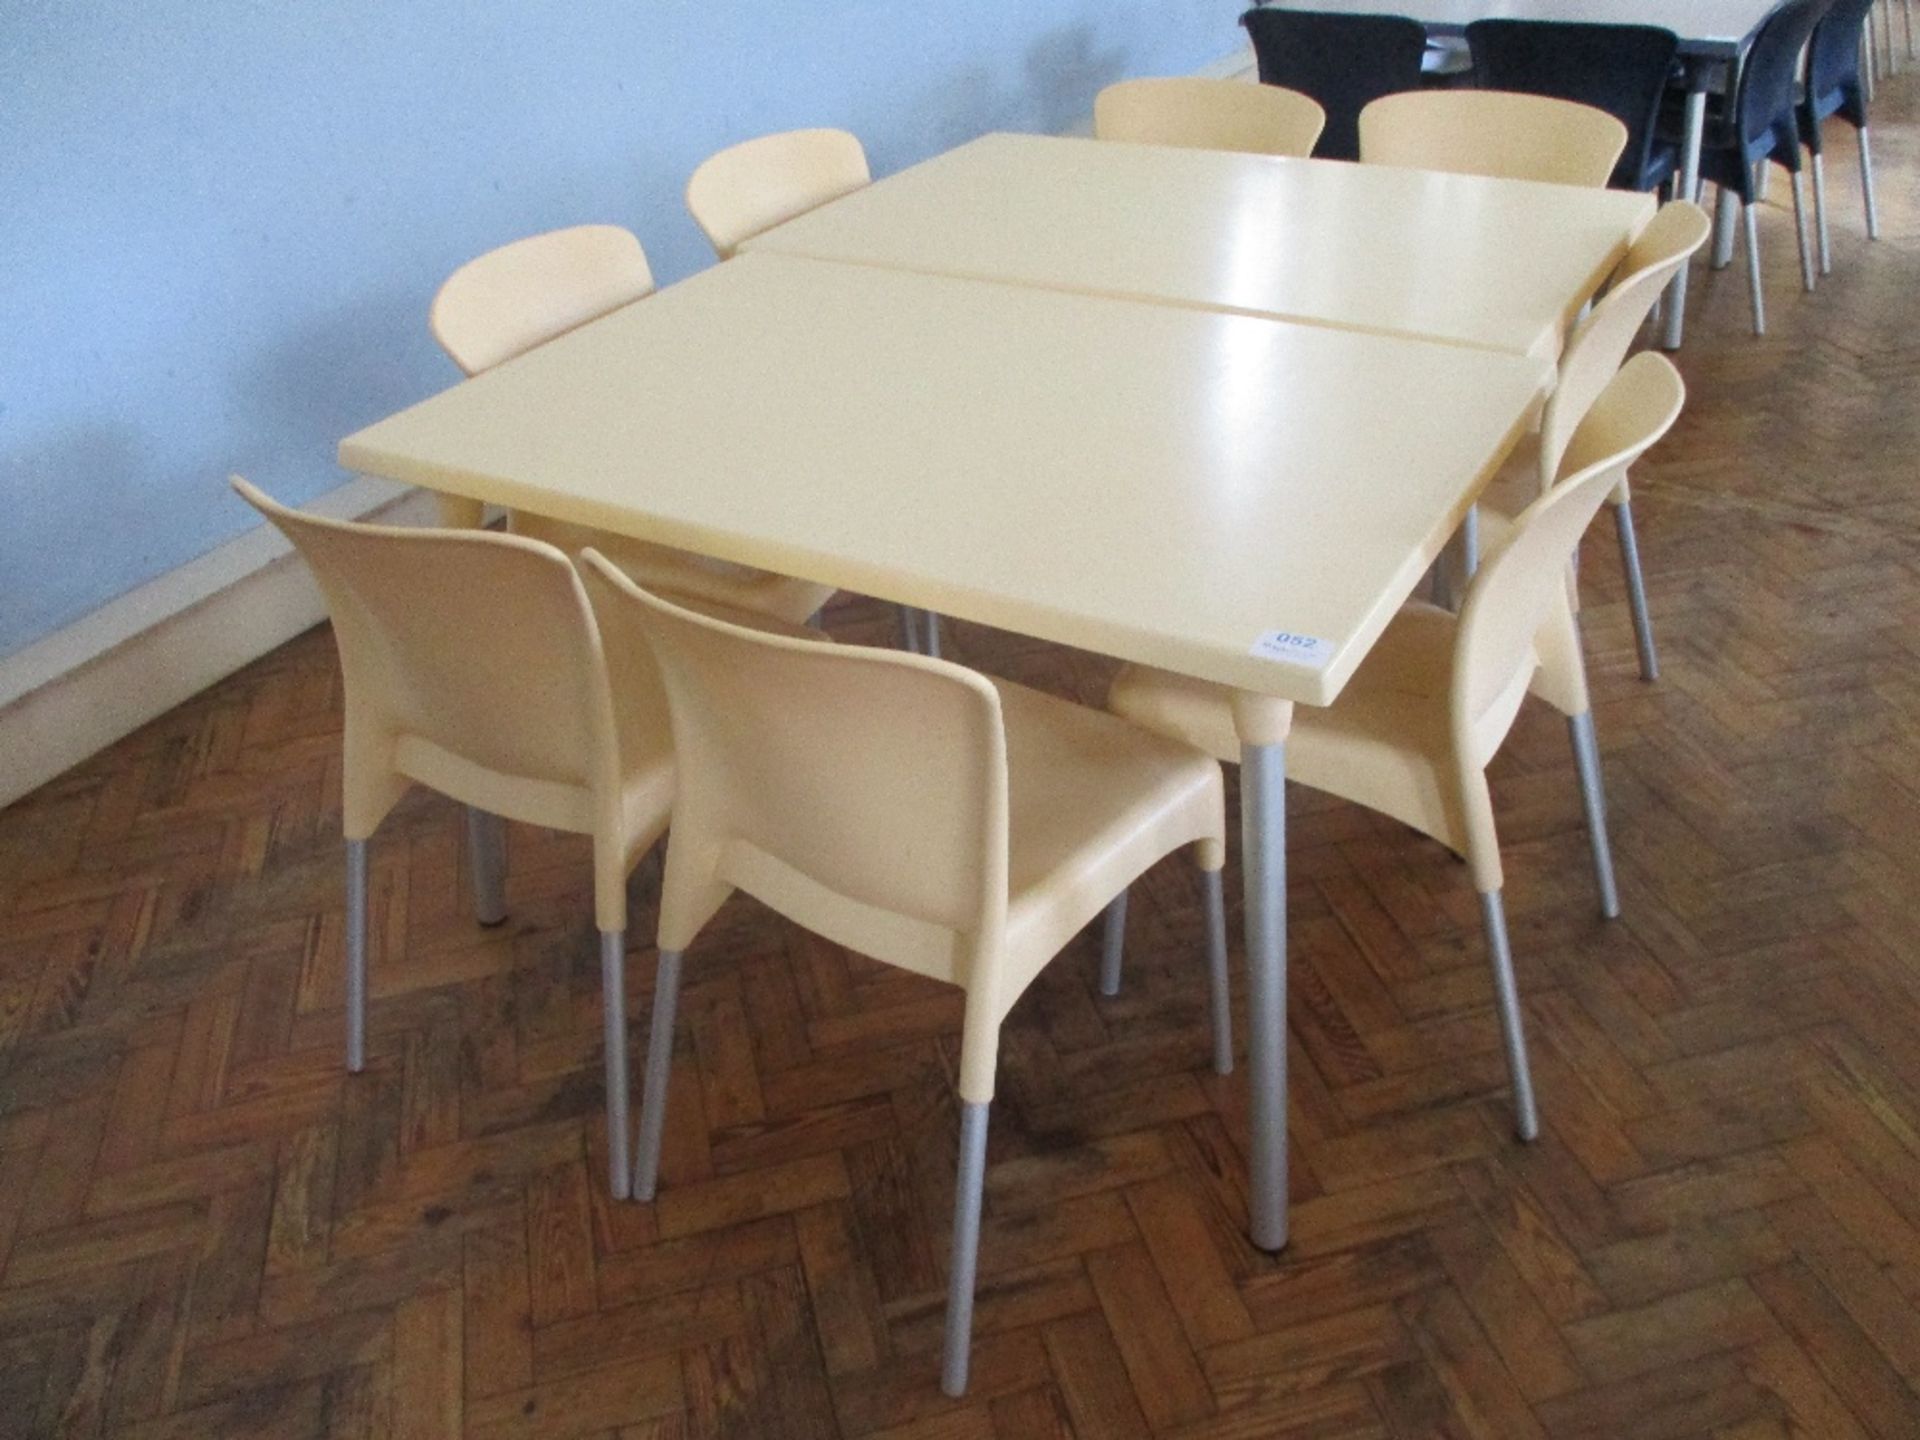 (2) Plastic Dining Tables and Chairs